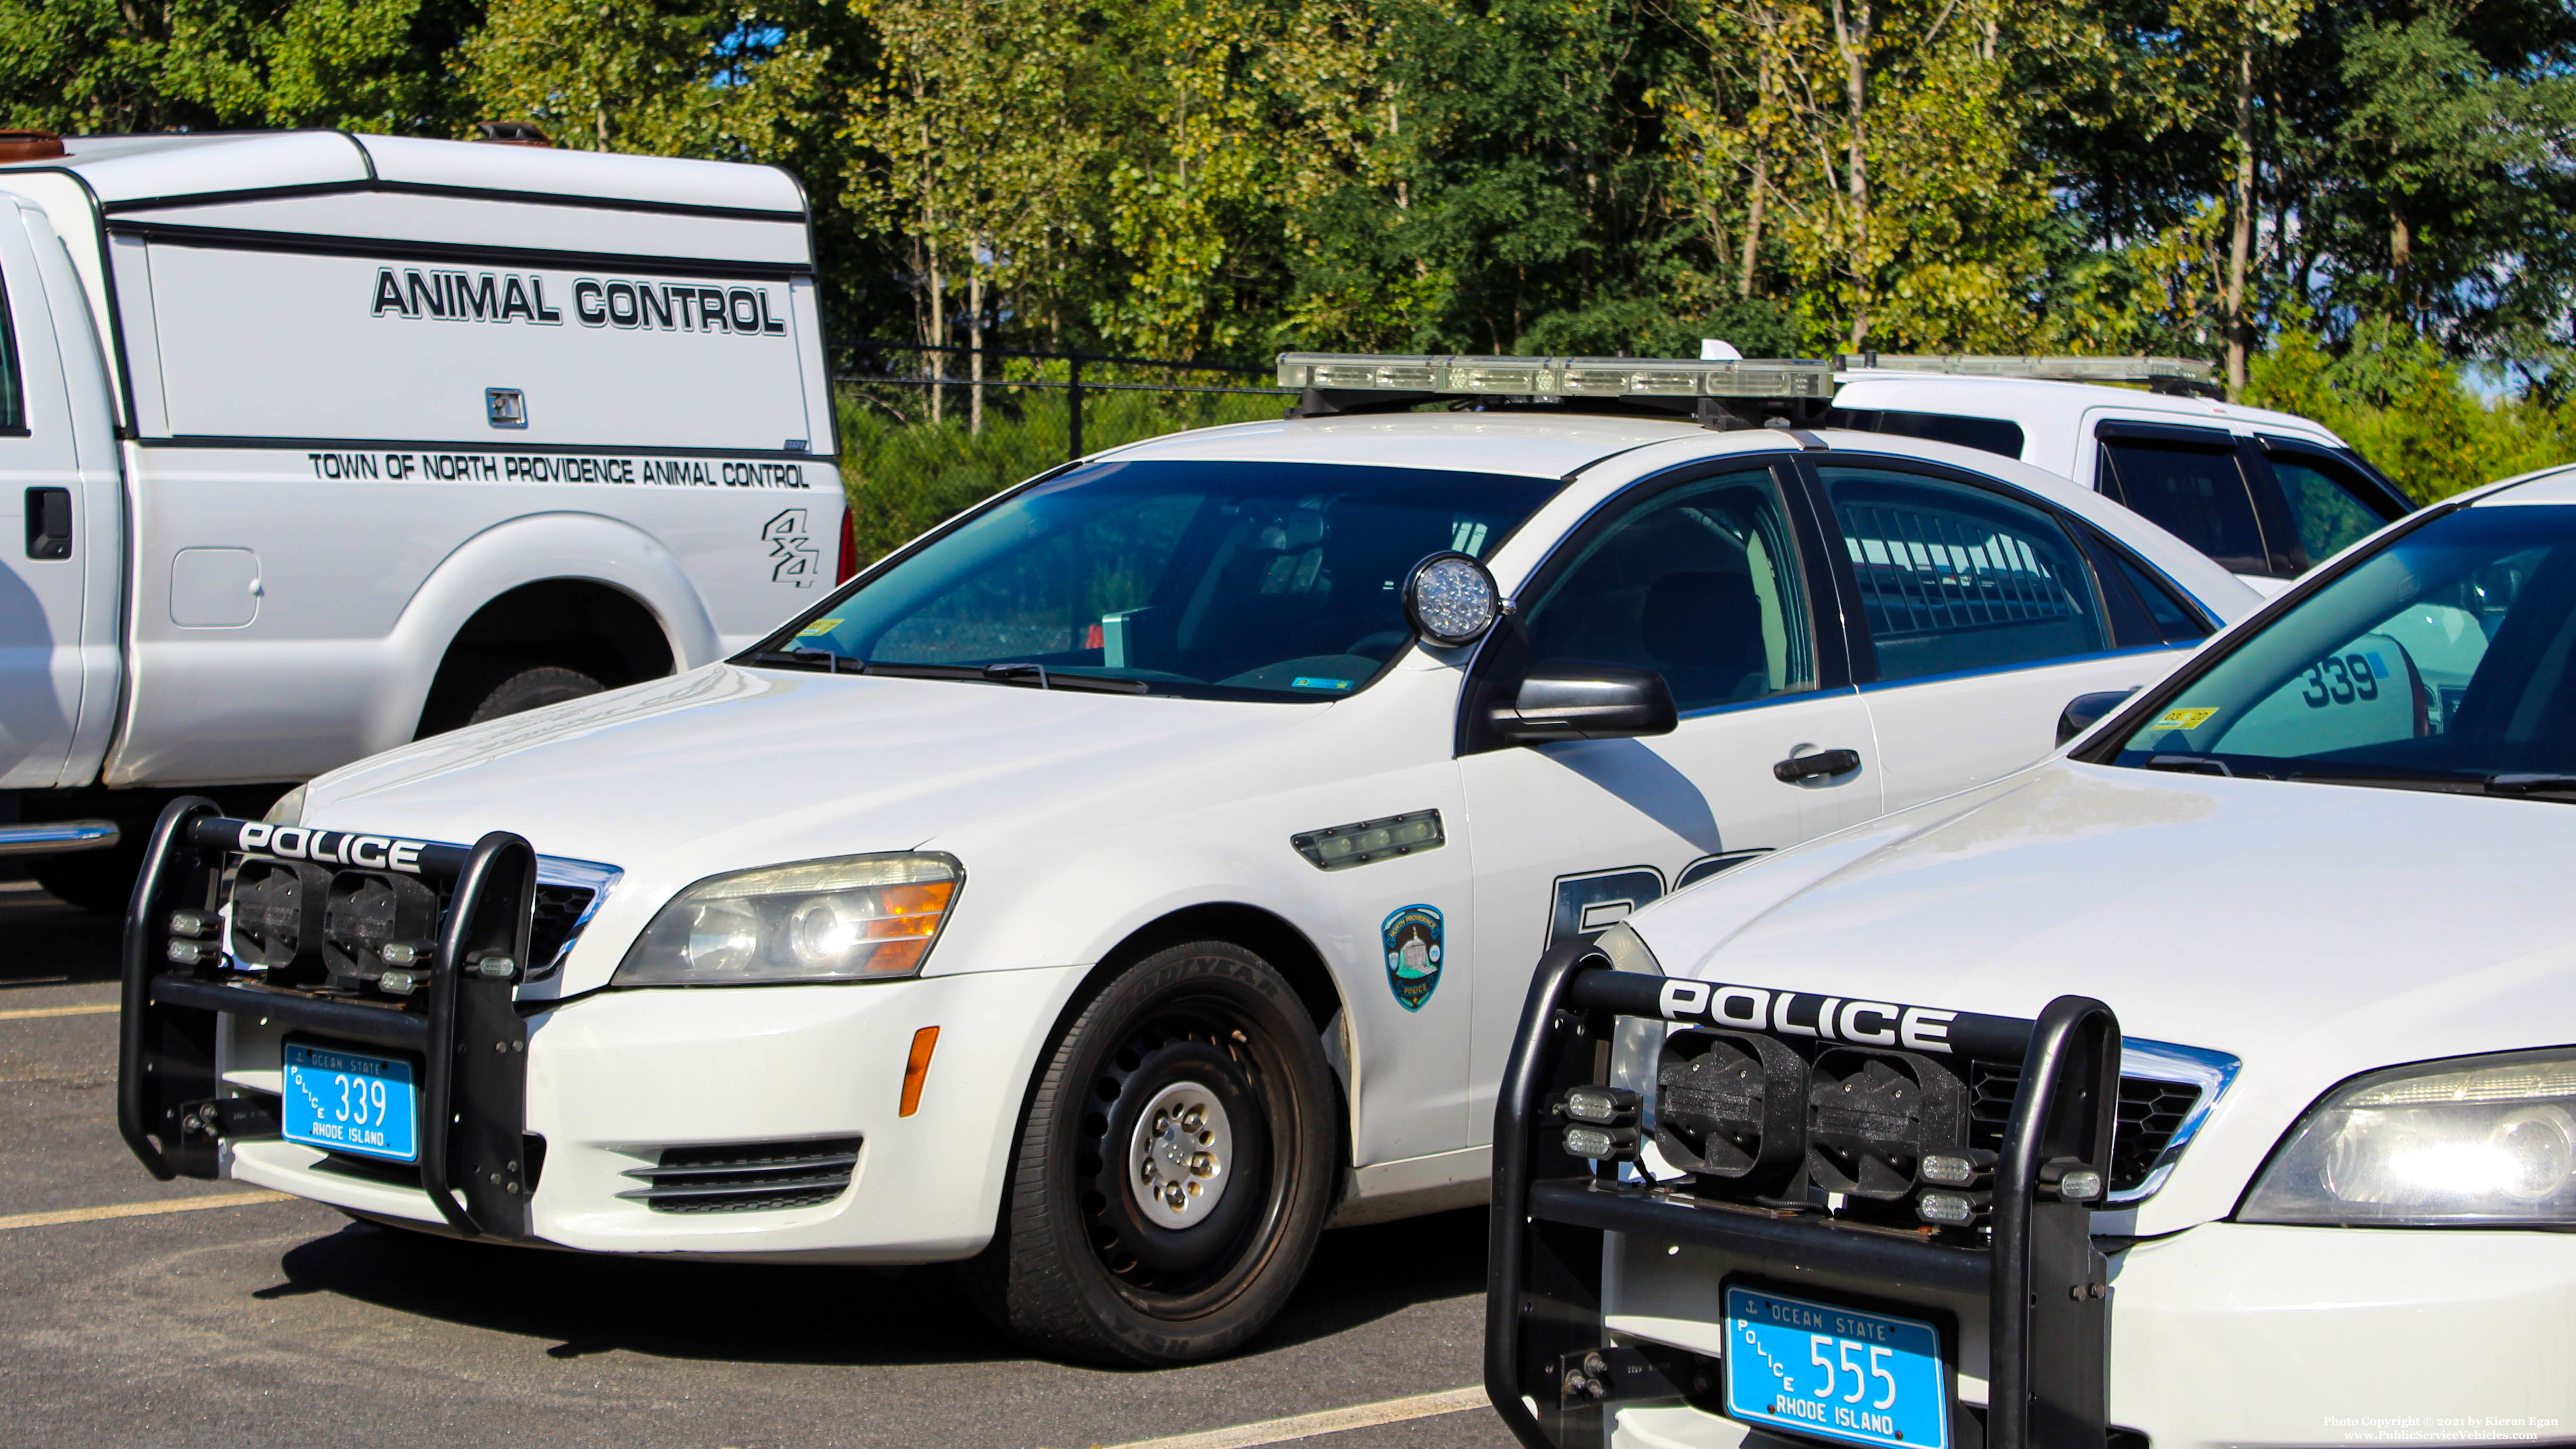 A photo  of North Providence Police
            Cruiser 339, a 2012 Chevrolet Caprice             taken by Kieran Egan